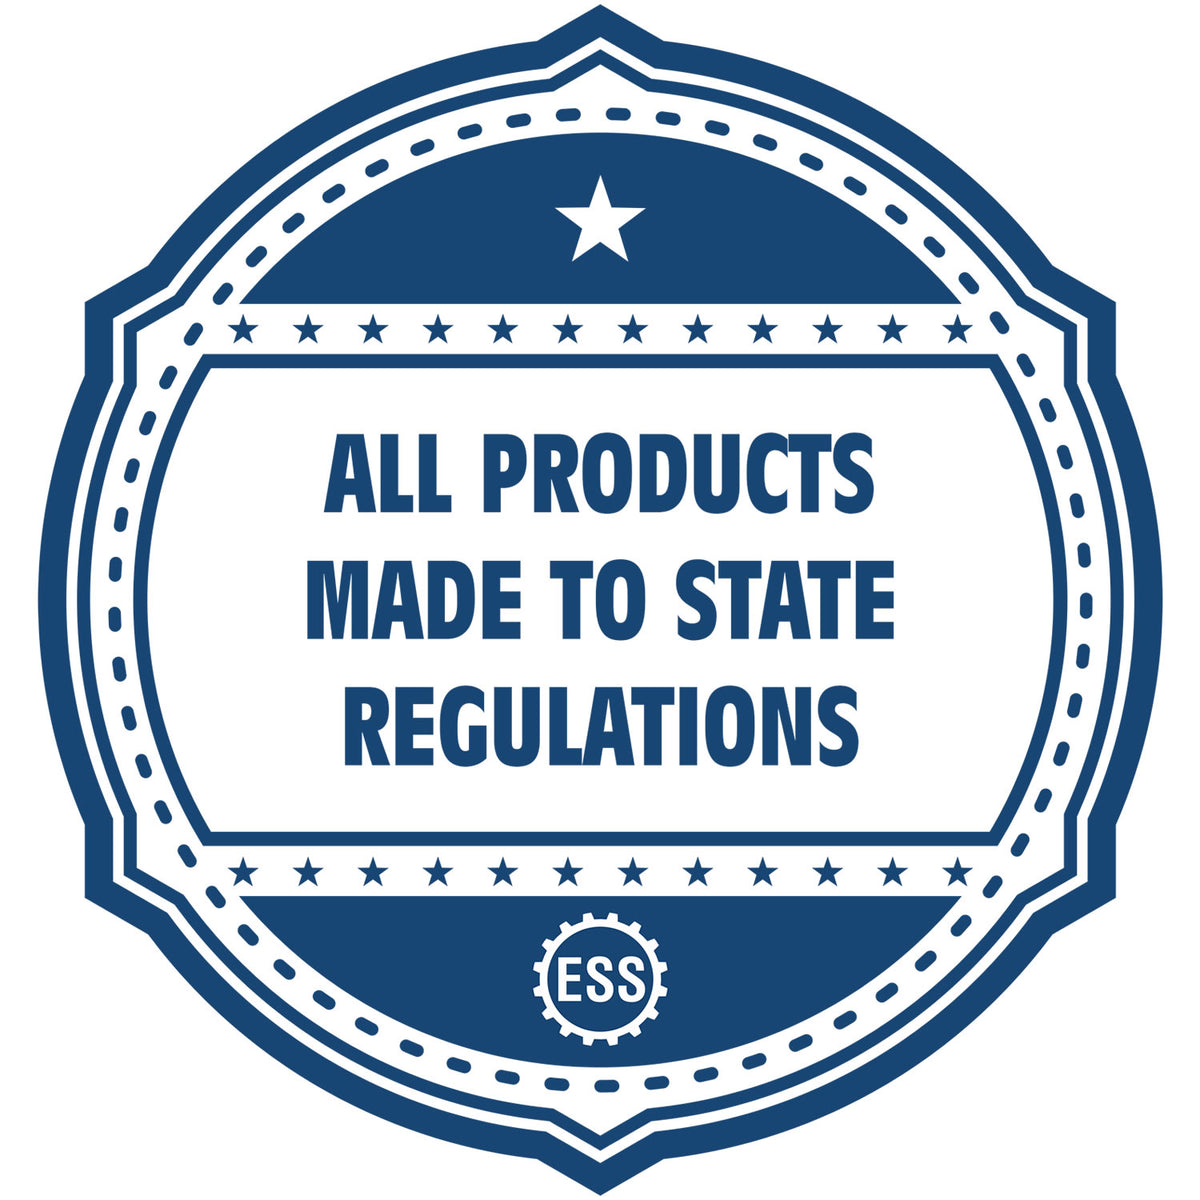 A blue icon or badge for the Hybrid Indiana Landscape Architect Seal showing that this product is made in compliance with state regulations.